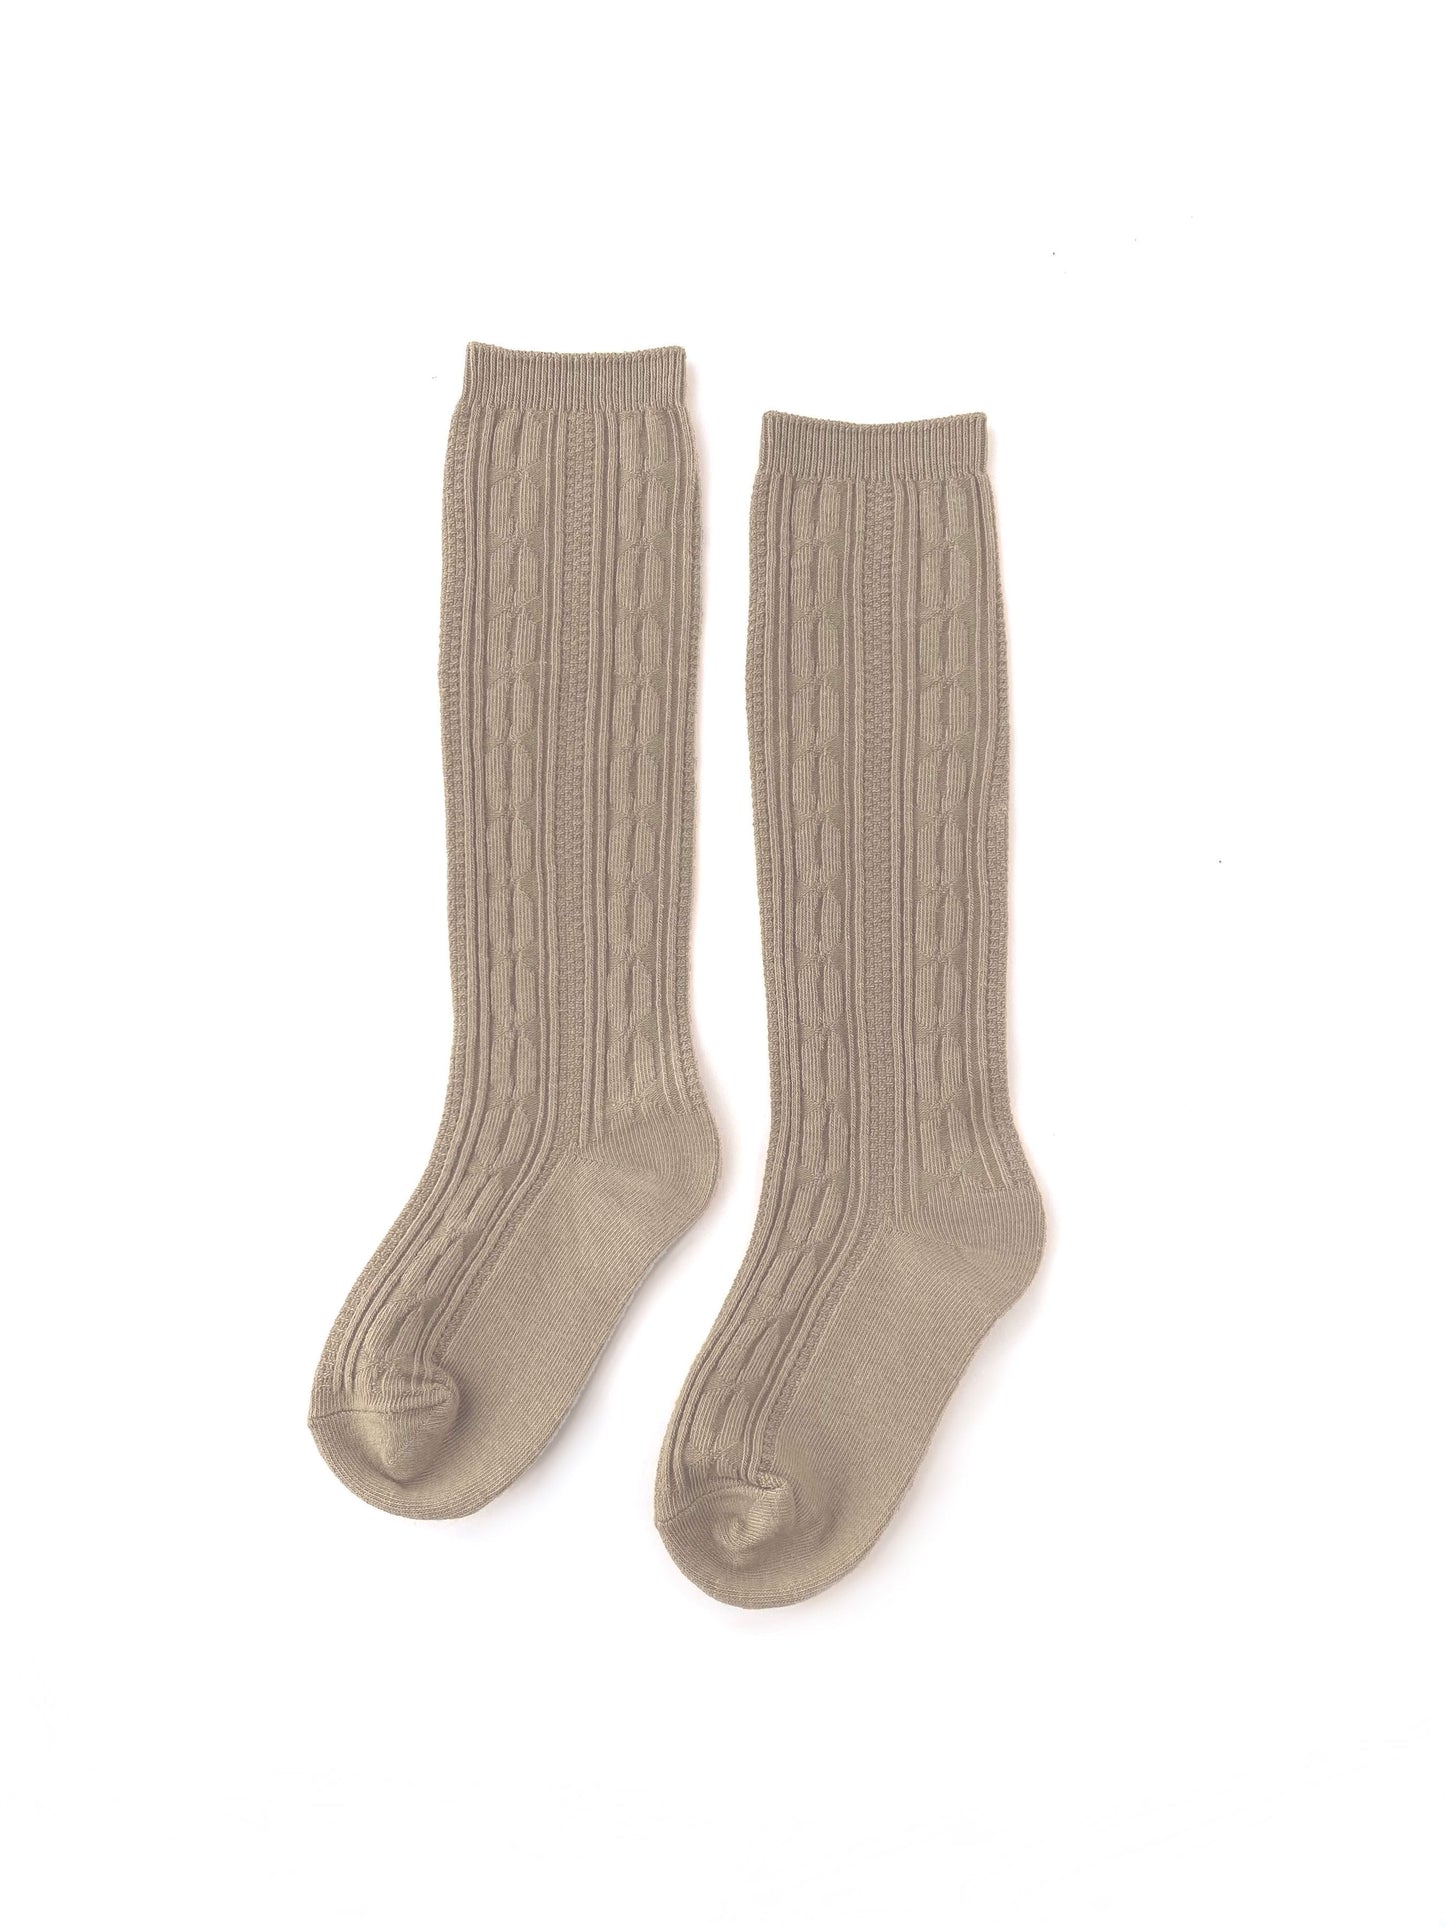 Little Stocking Co. Neutral Cable Knit Knee High Socks